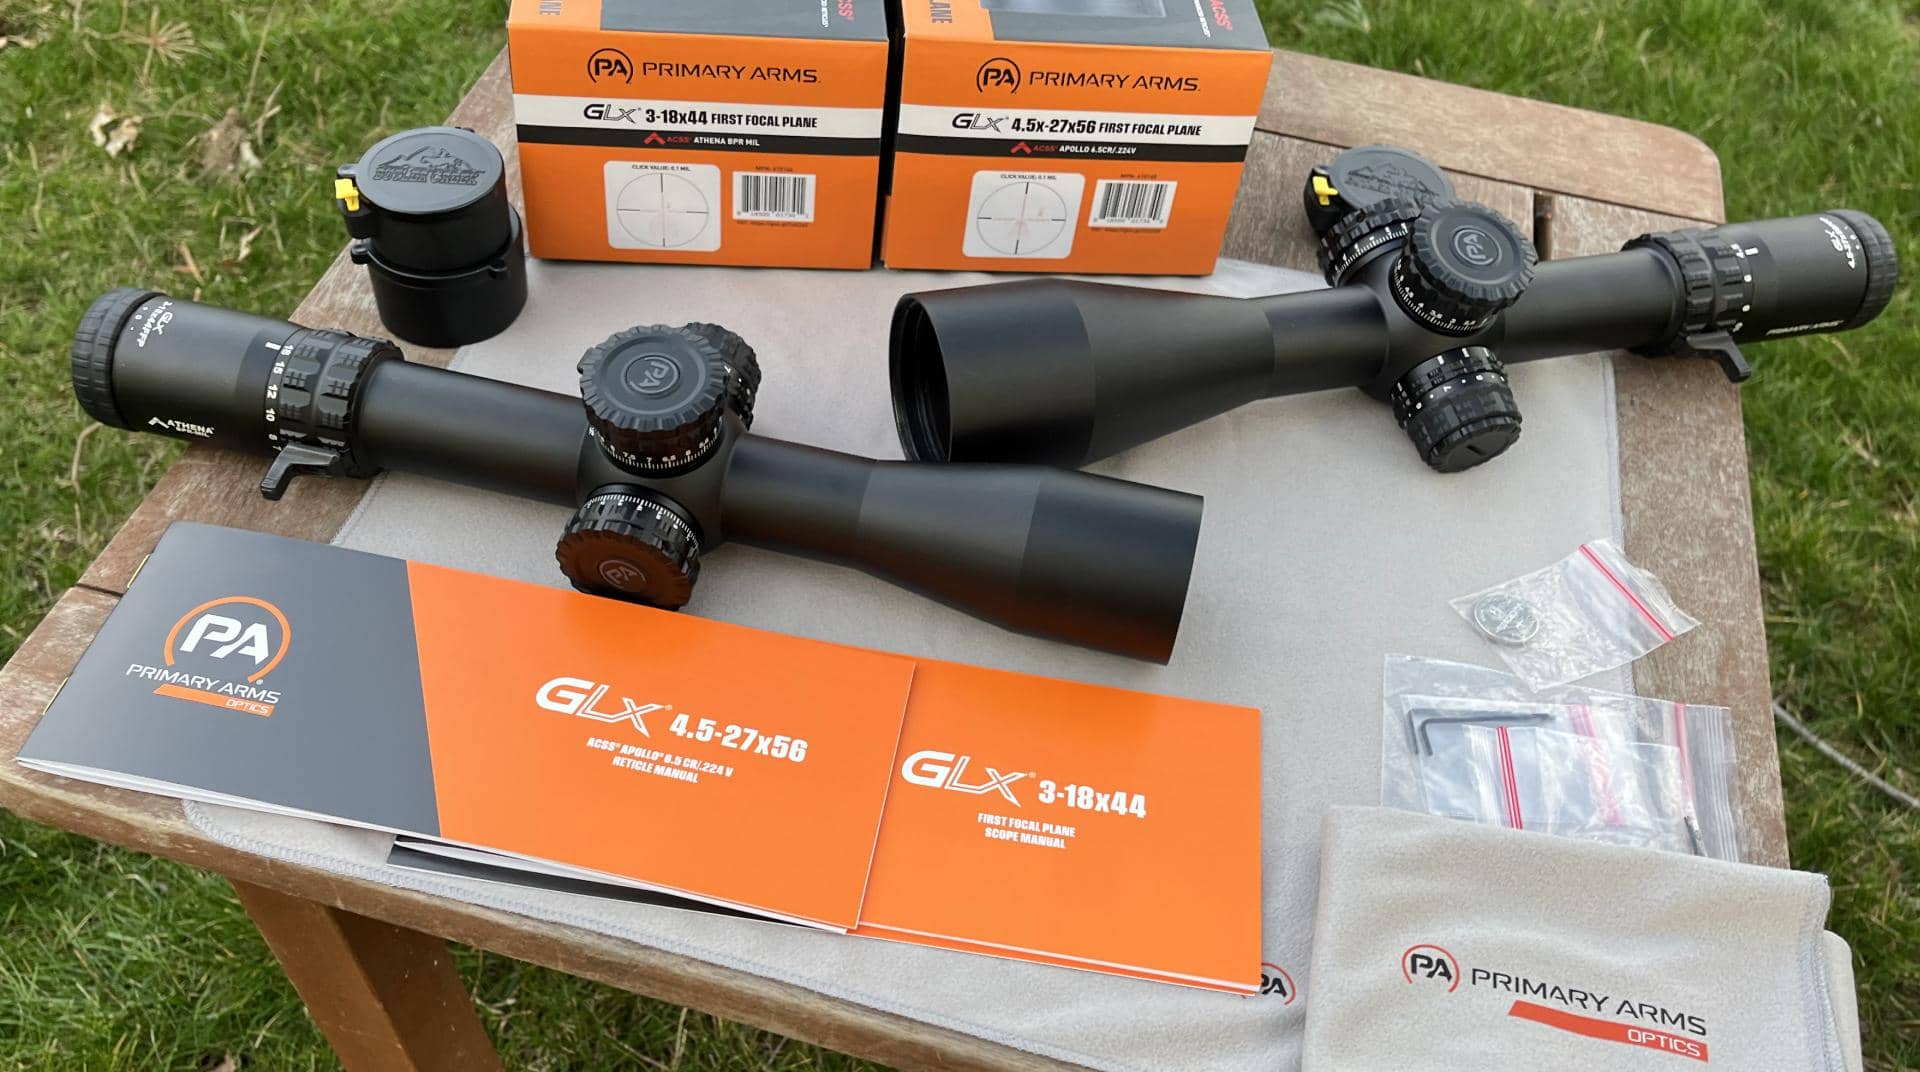 Unboxing the Primary Arms Optics GLx 3-18x44 and 4.5-27x56